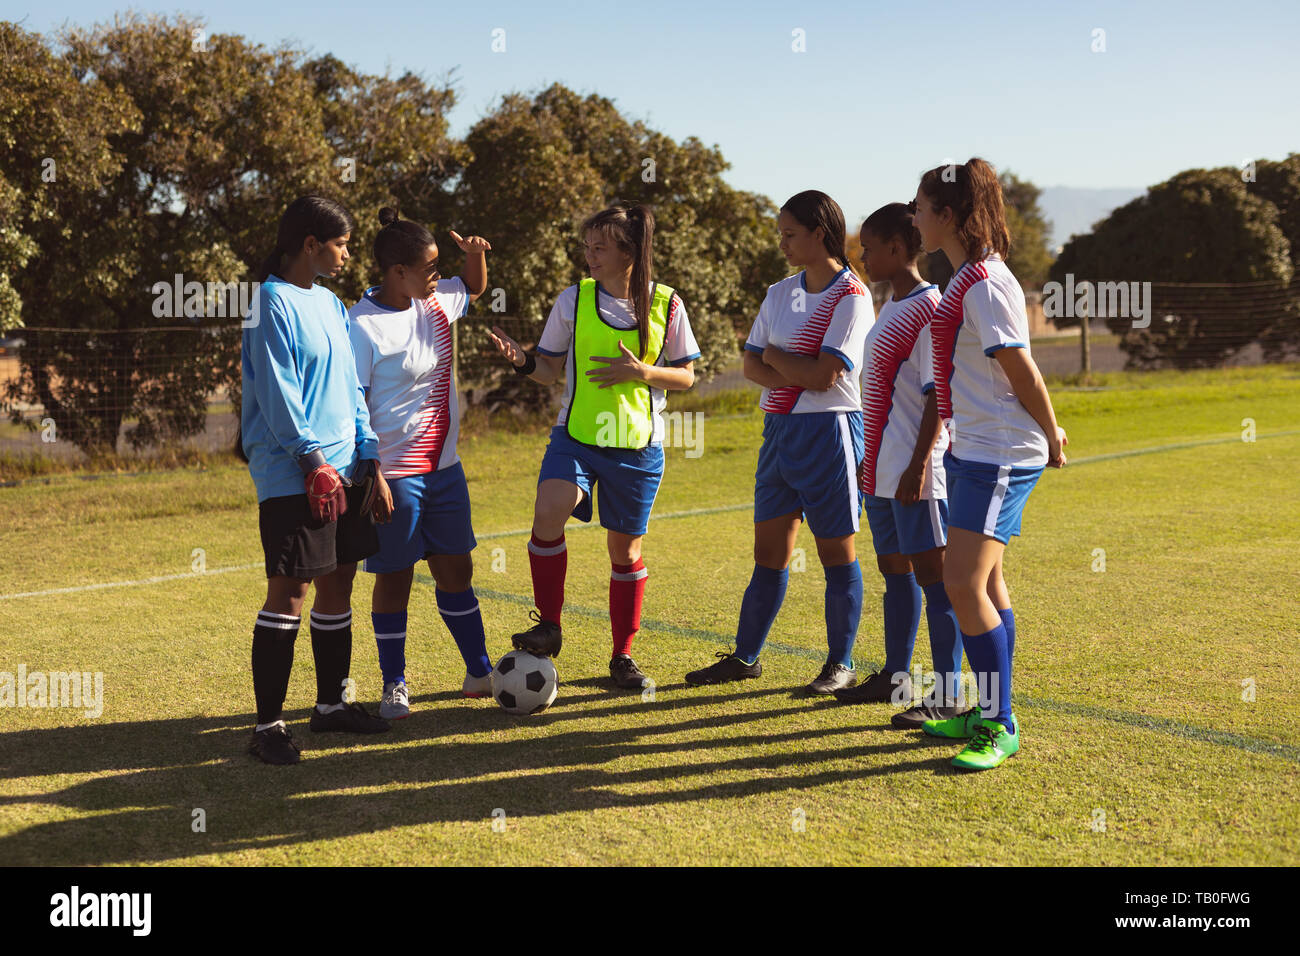 Soccer players interacting with each other at sports field Stock Photo